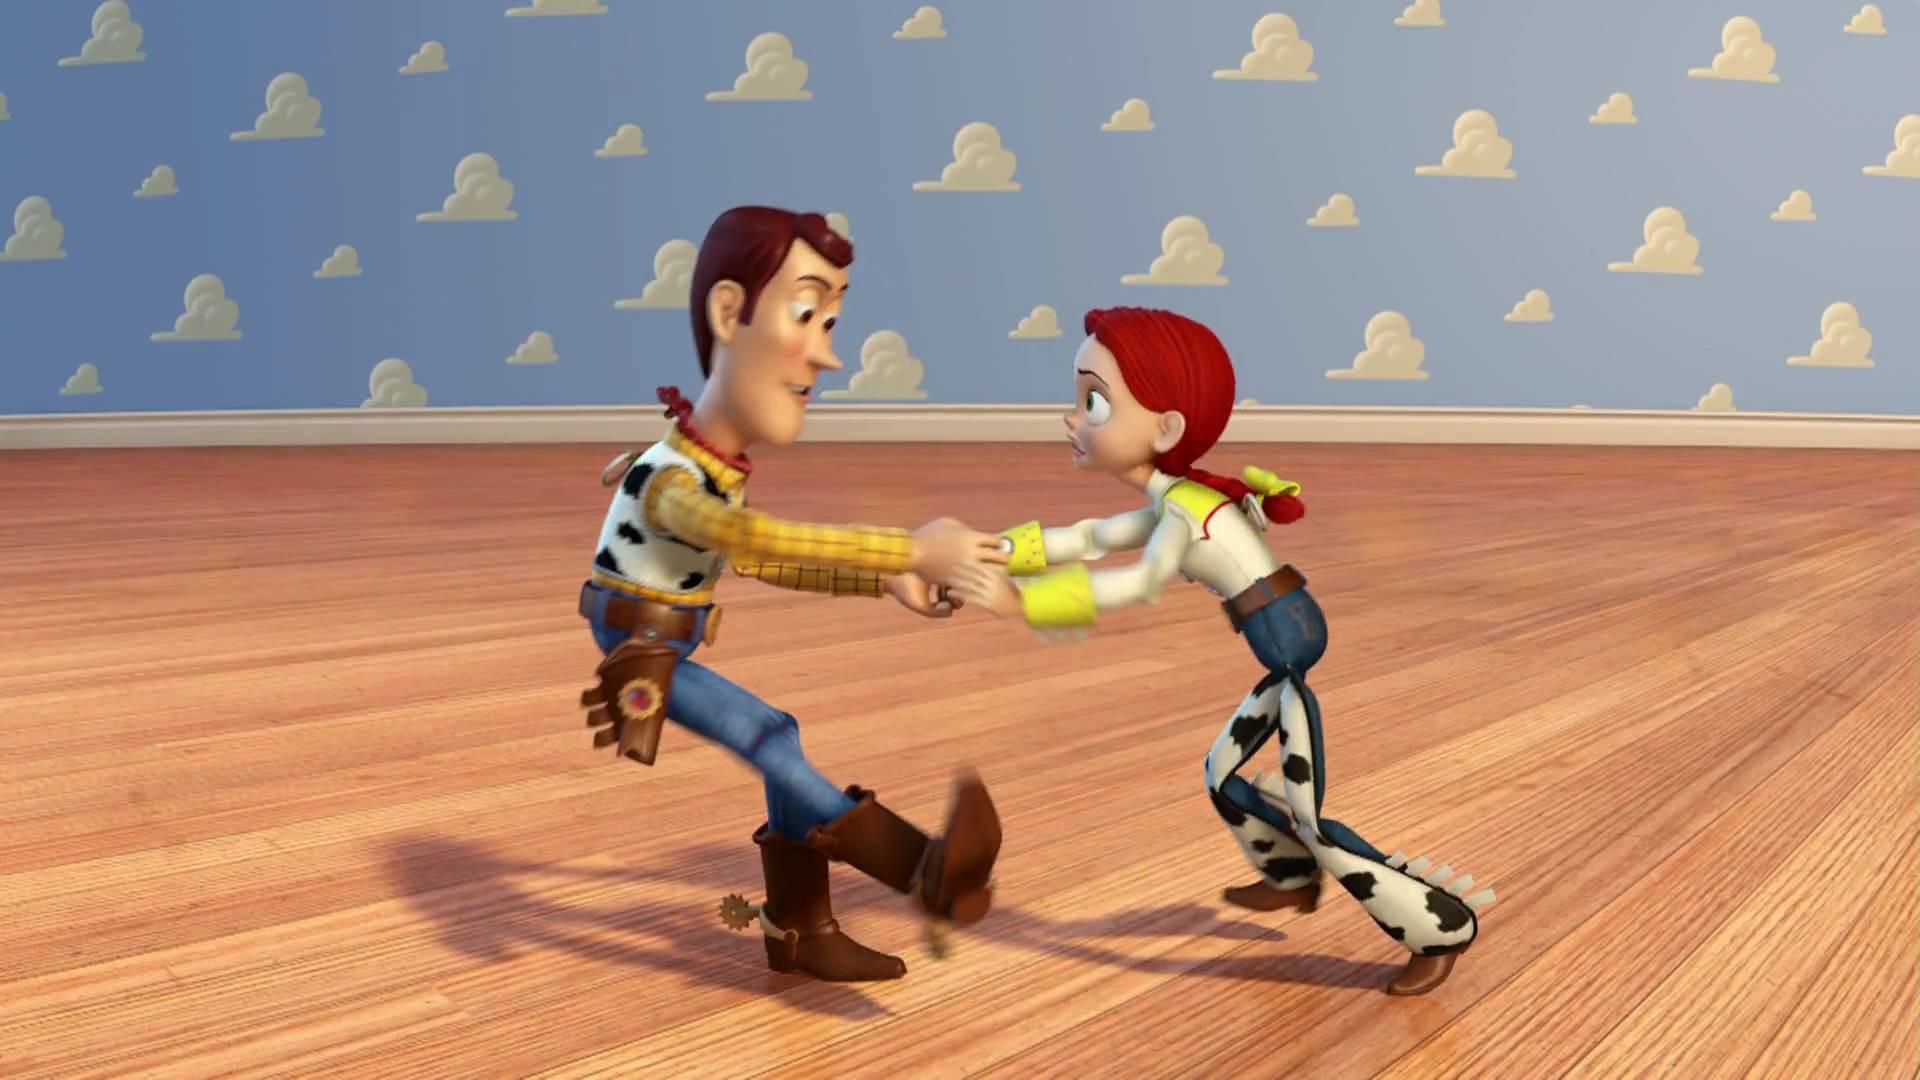 Jessie Toy Story Wallpapers Wallpaper Cave